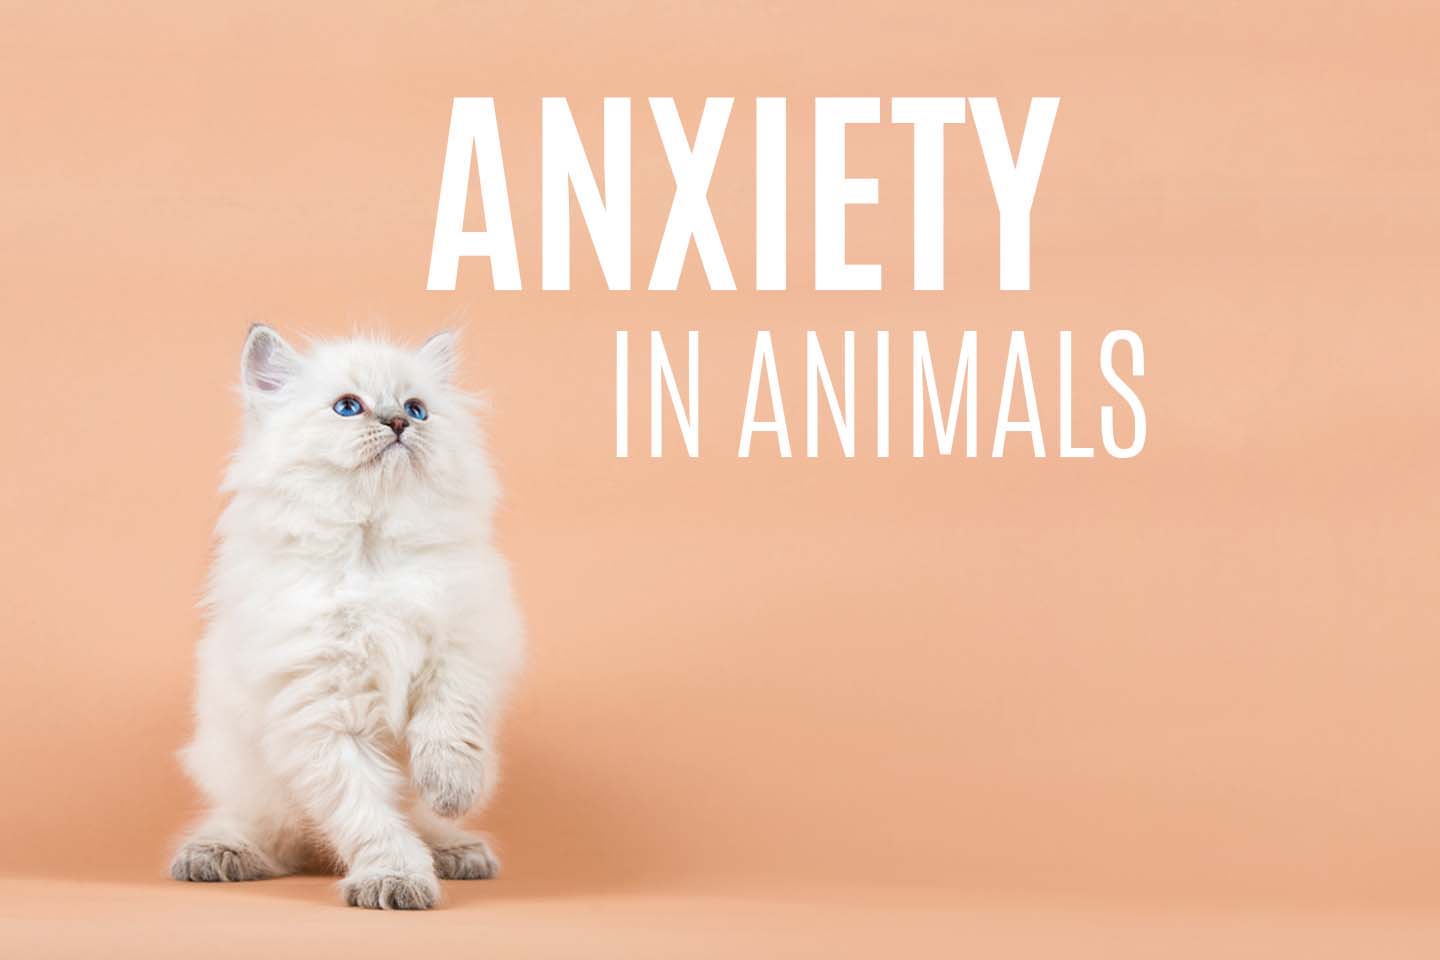 Anxiety in animals chattanooga fluffy white cat on orange background